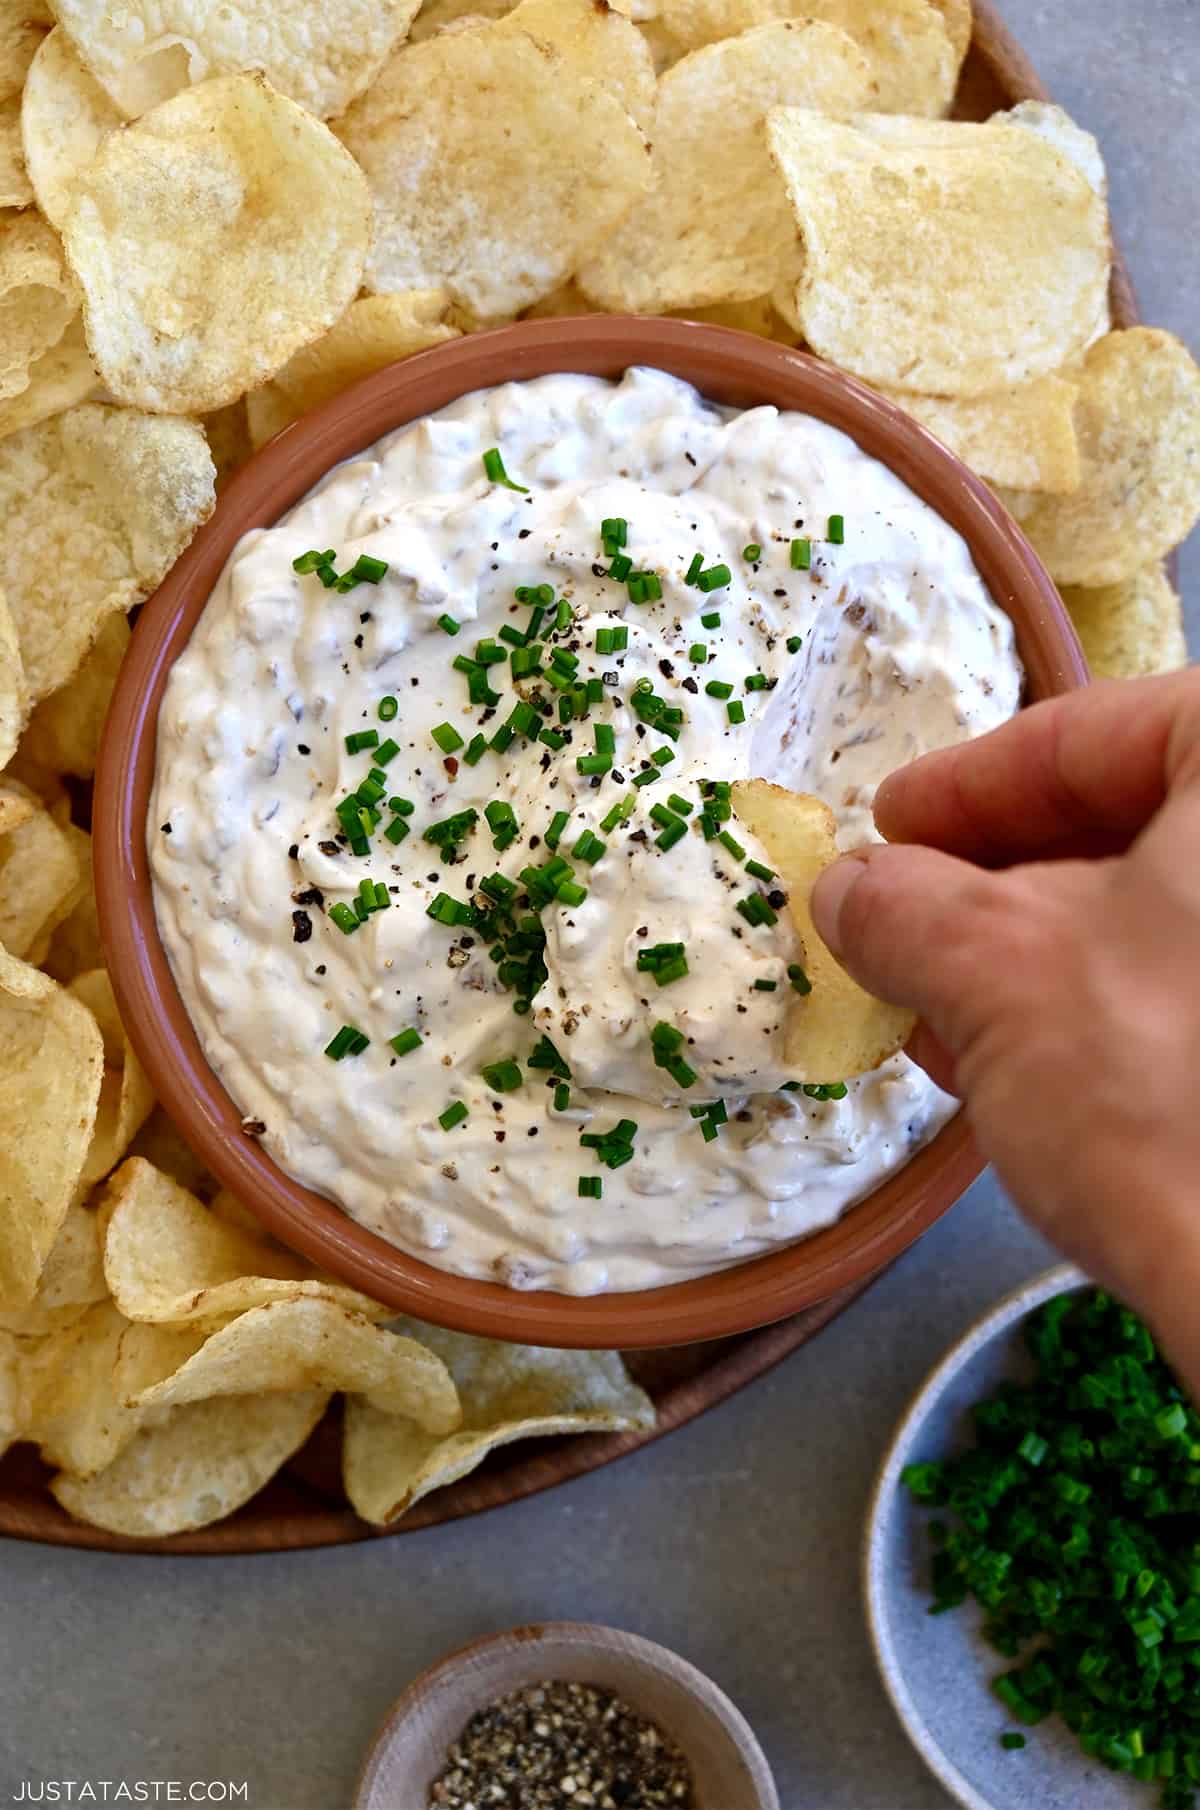 A hand holding a potato chip dips it into a bowl containing sour cream and onion dip that's on a plate surrounded by potato chips.